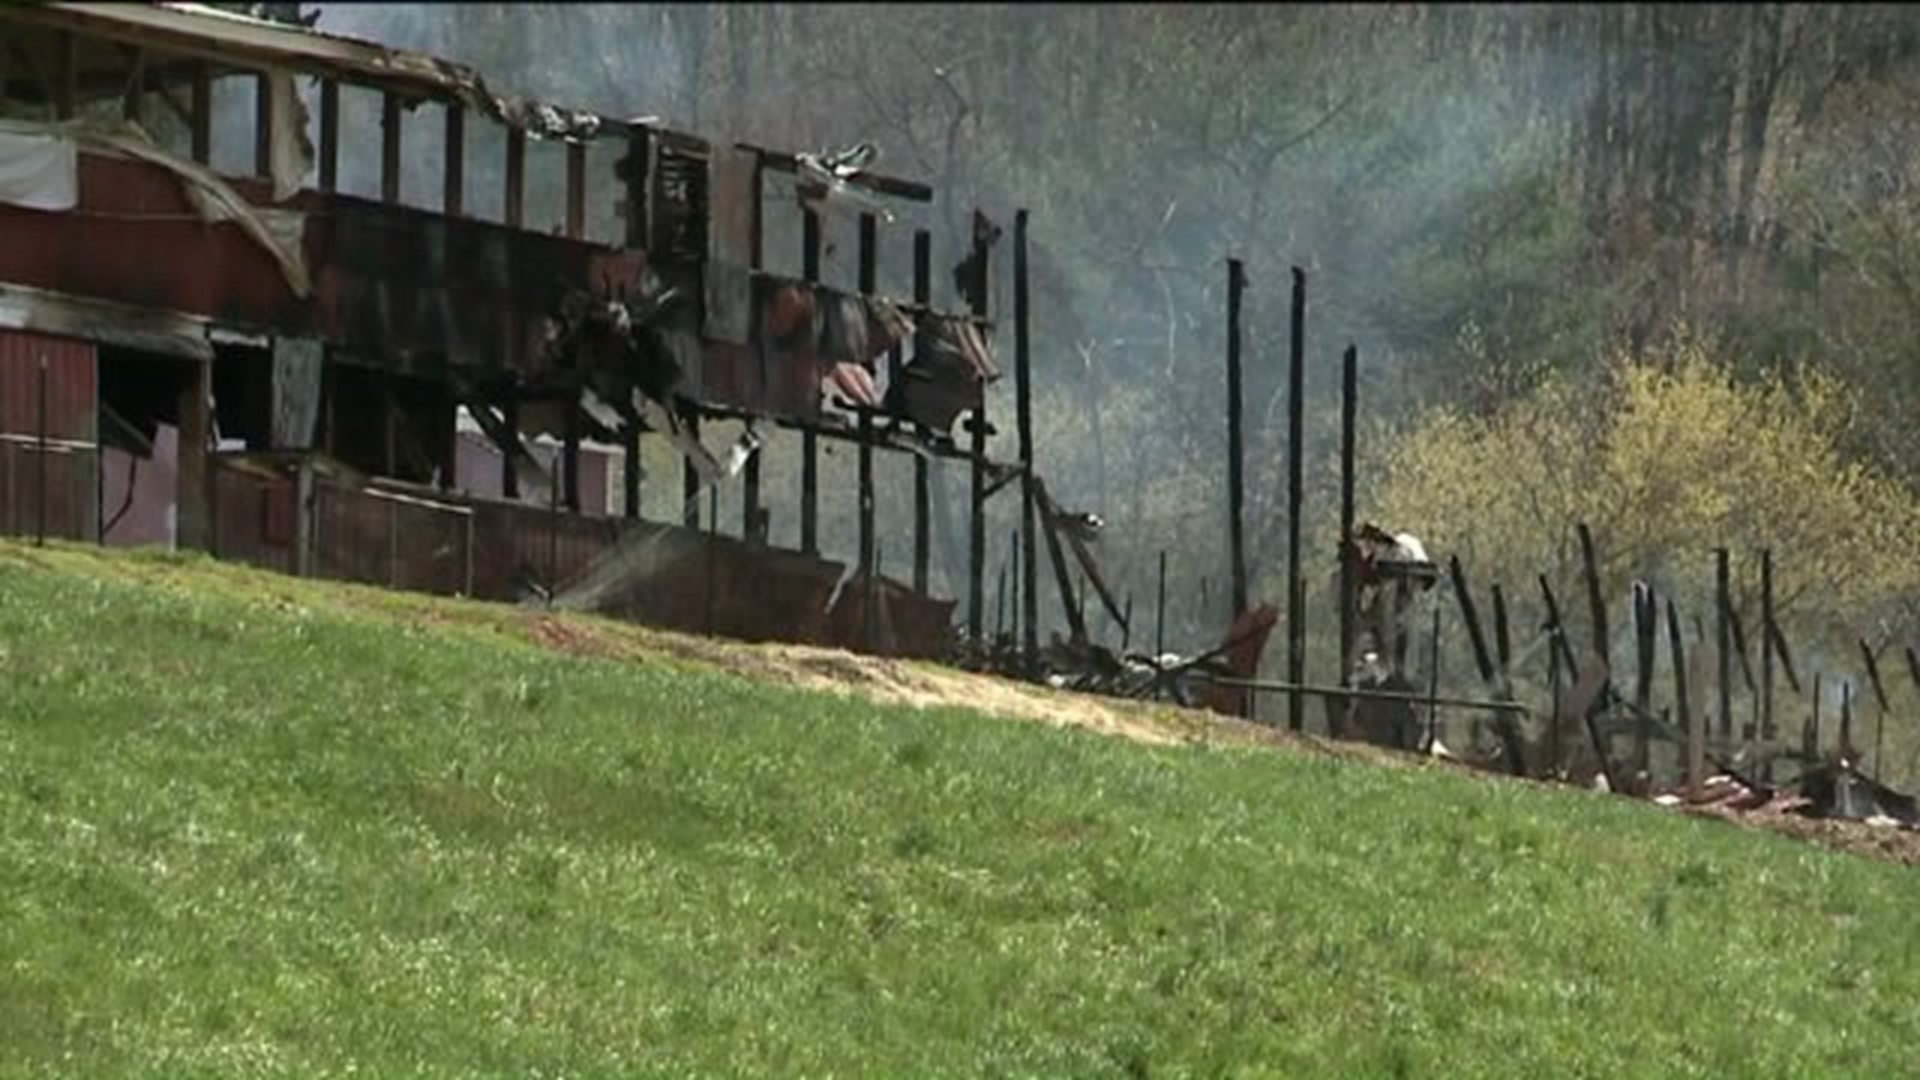 Too Much Damage to Find Cause of Barn Fire